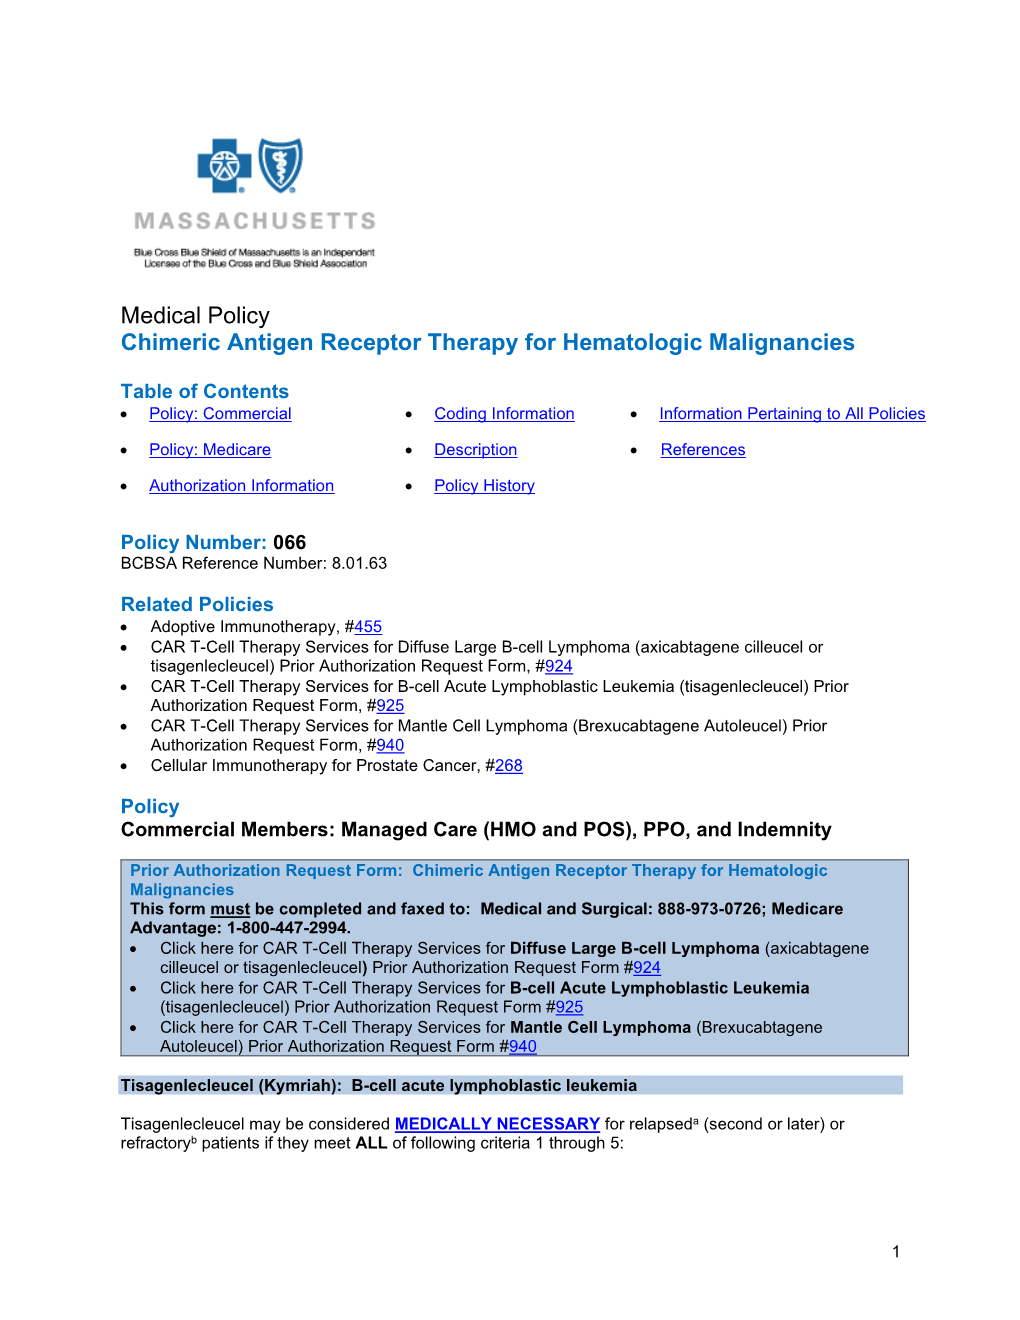 Medical Policy #066 Chimeric Antigen Receptor Therapy for Hematologic